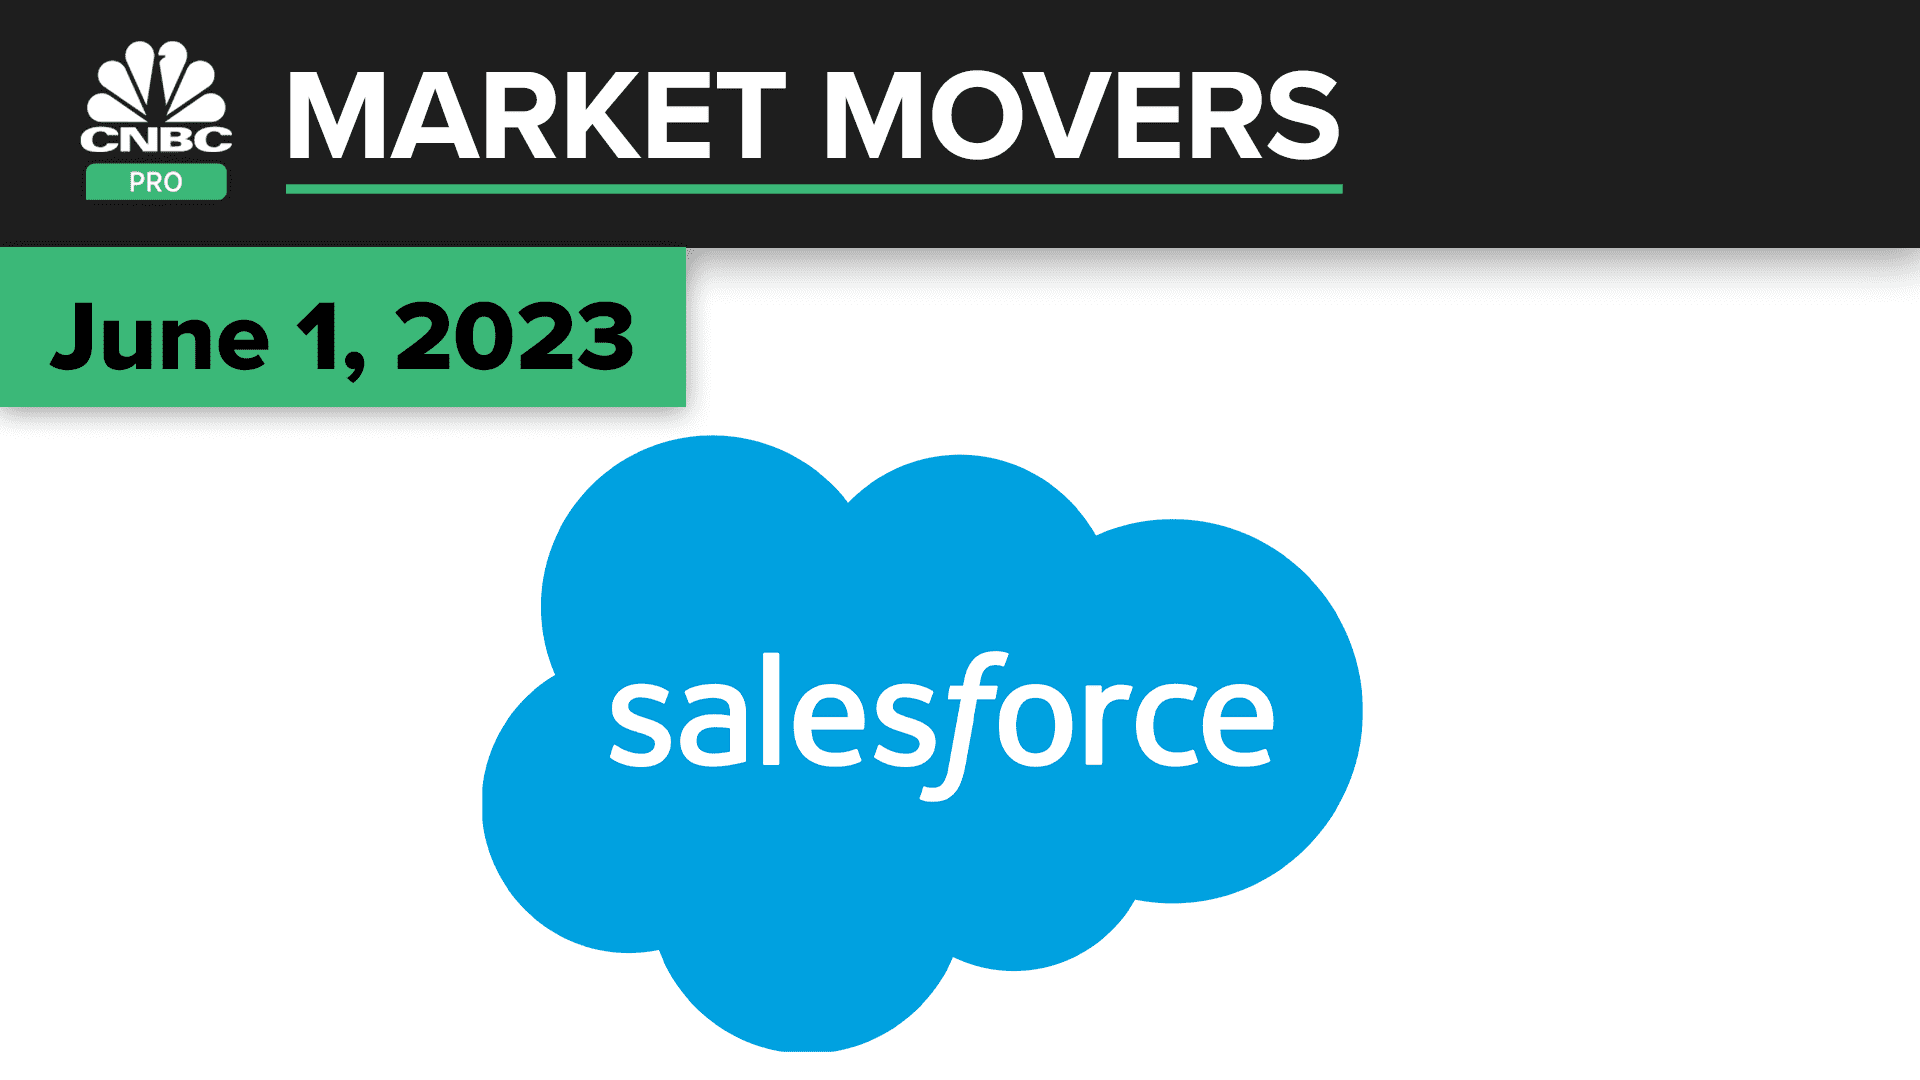 Salesforce shares tumble despite strong earnings. Here’s what the pros have to say